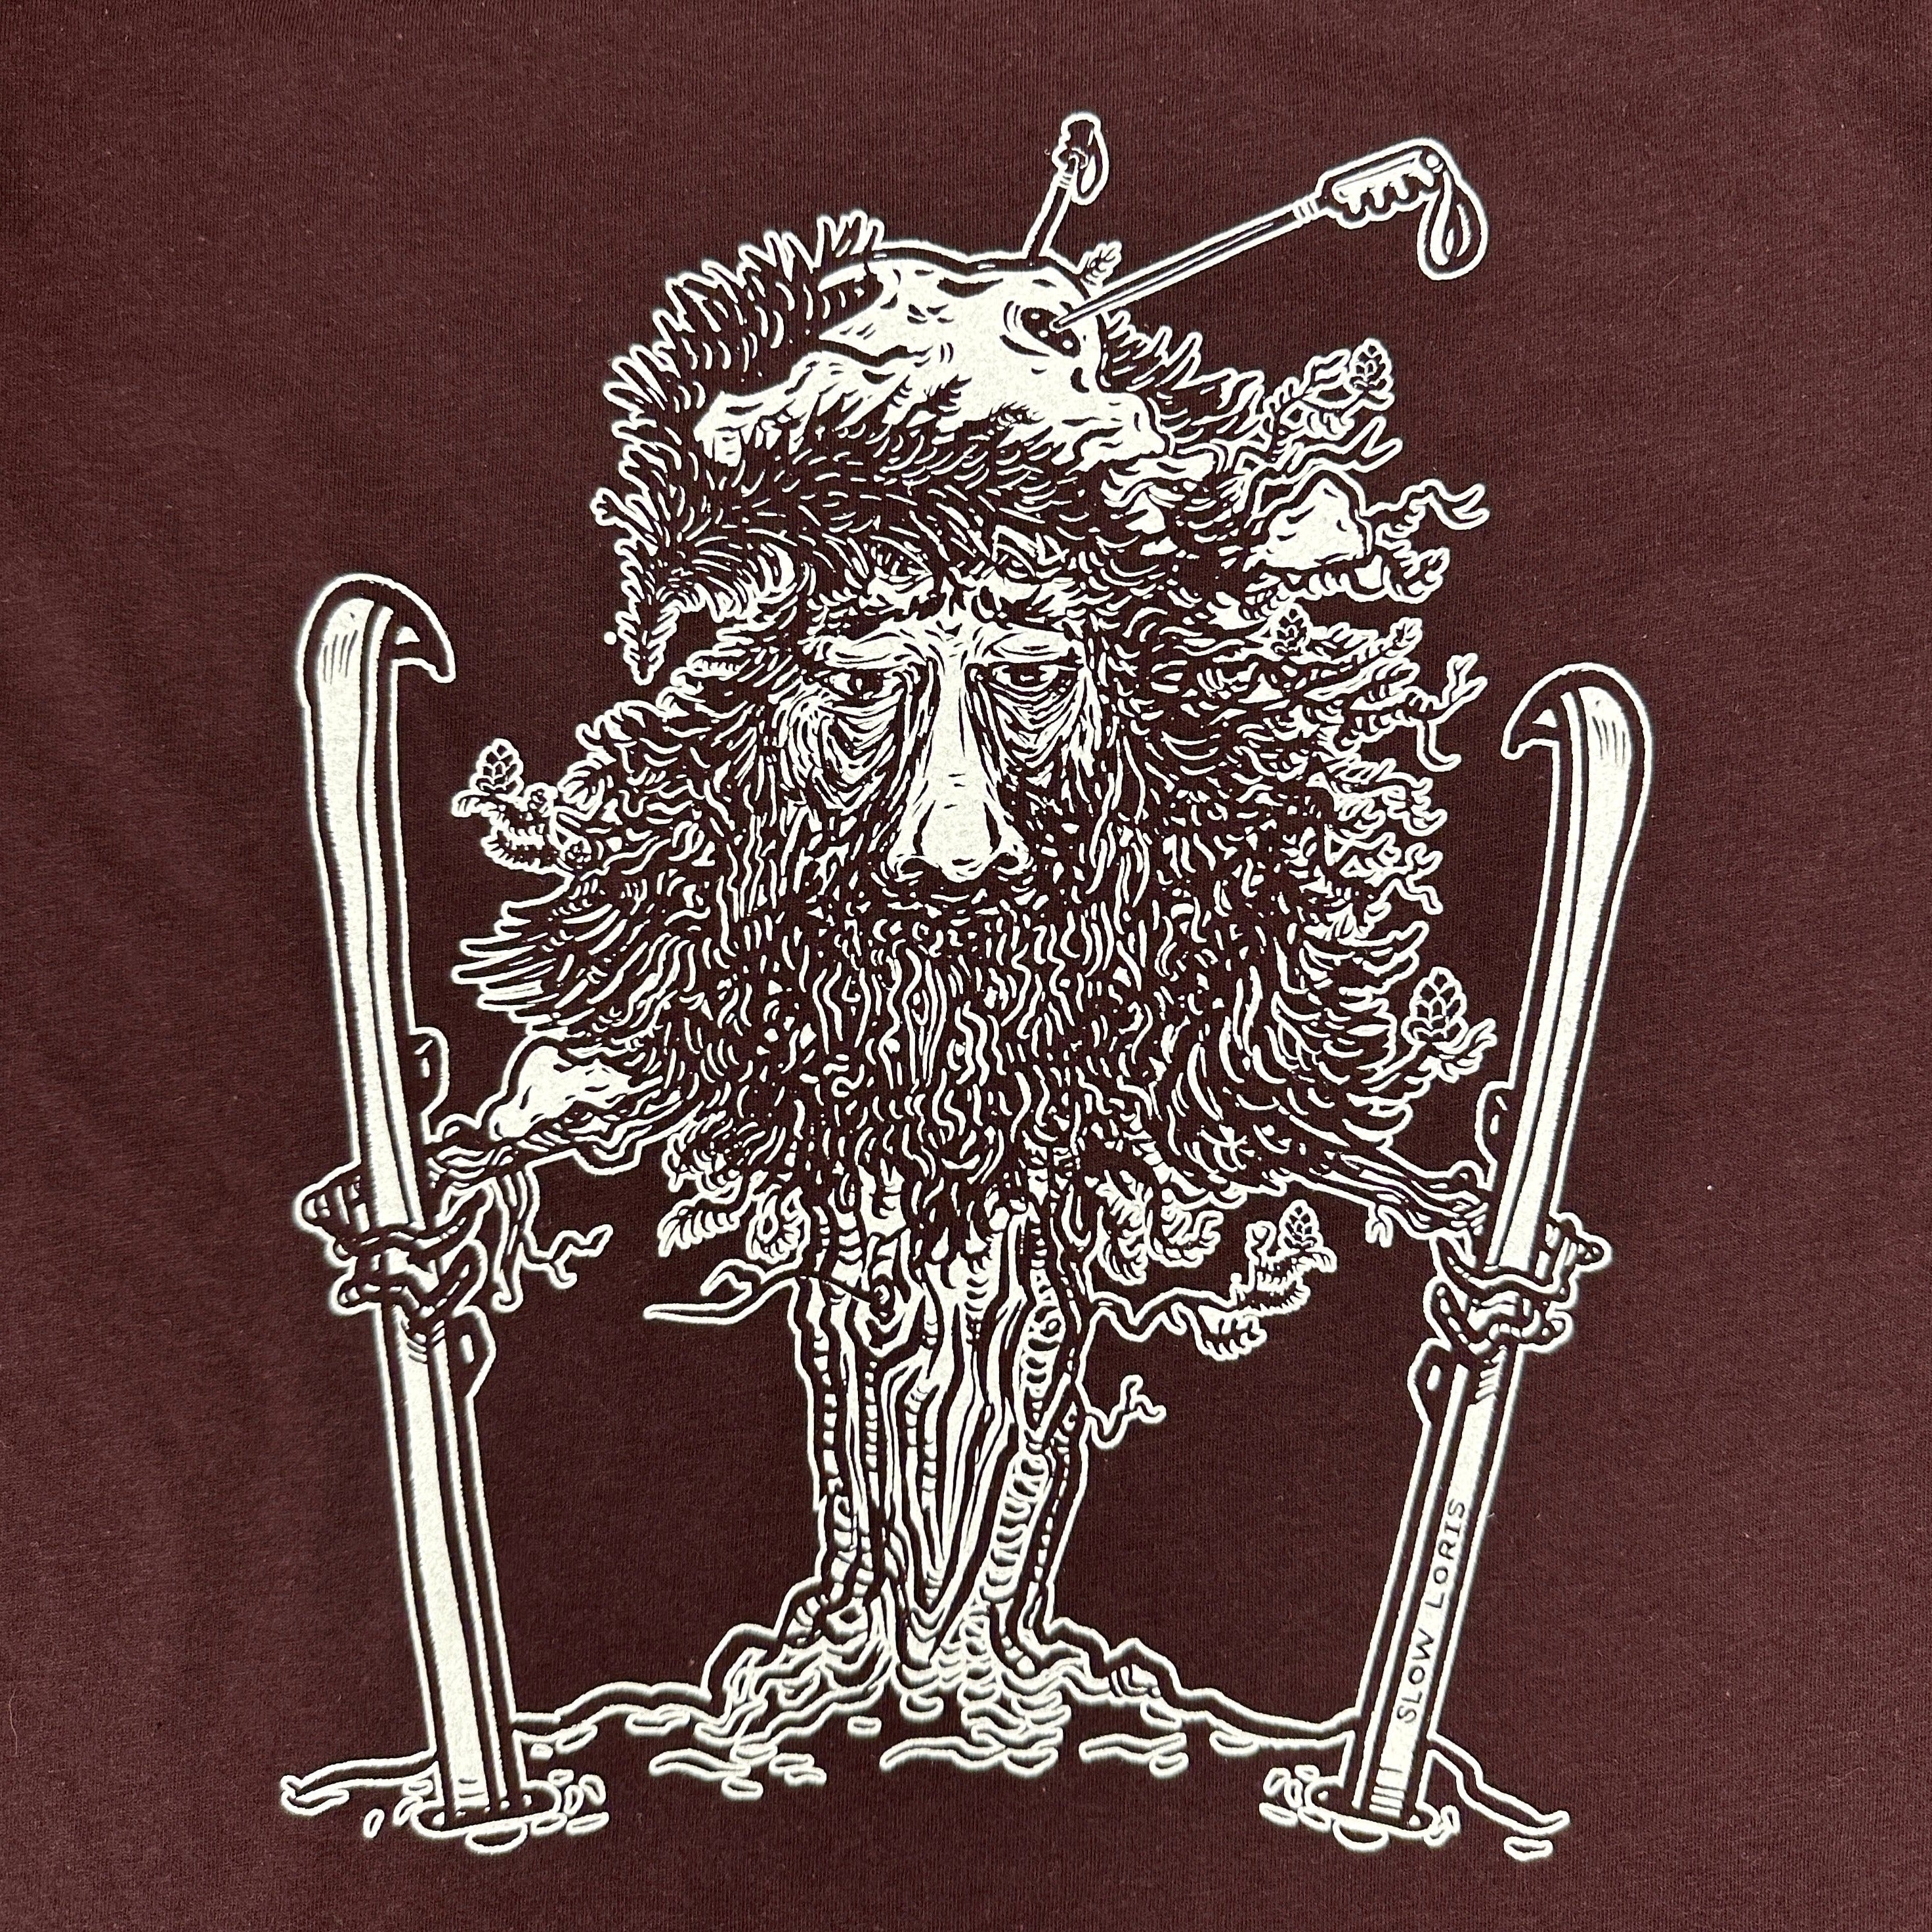 close up of tree man holding skis with ski poles in his top branches